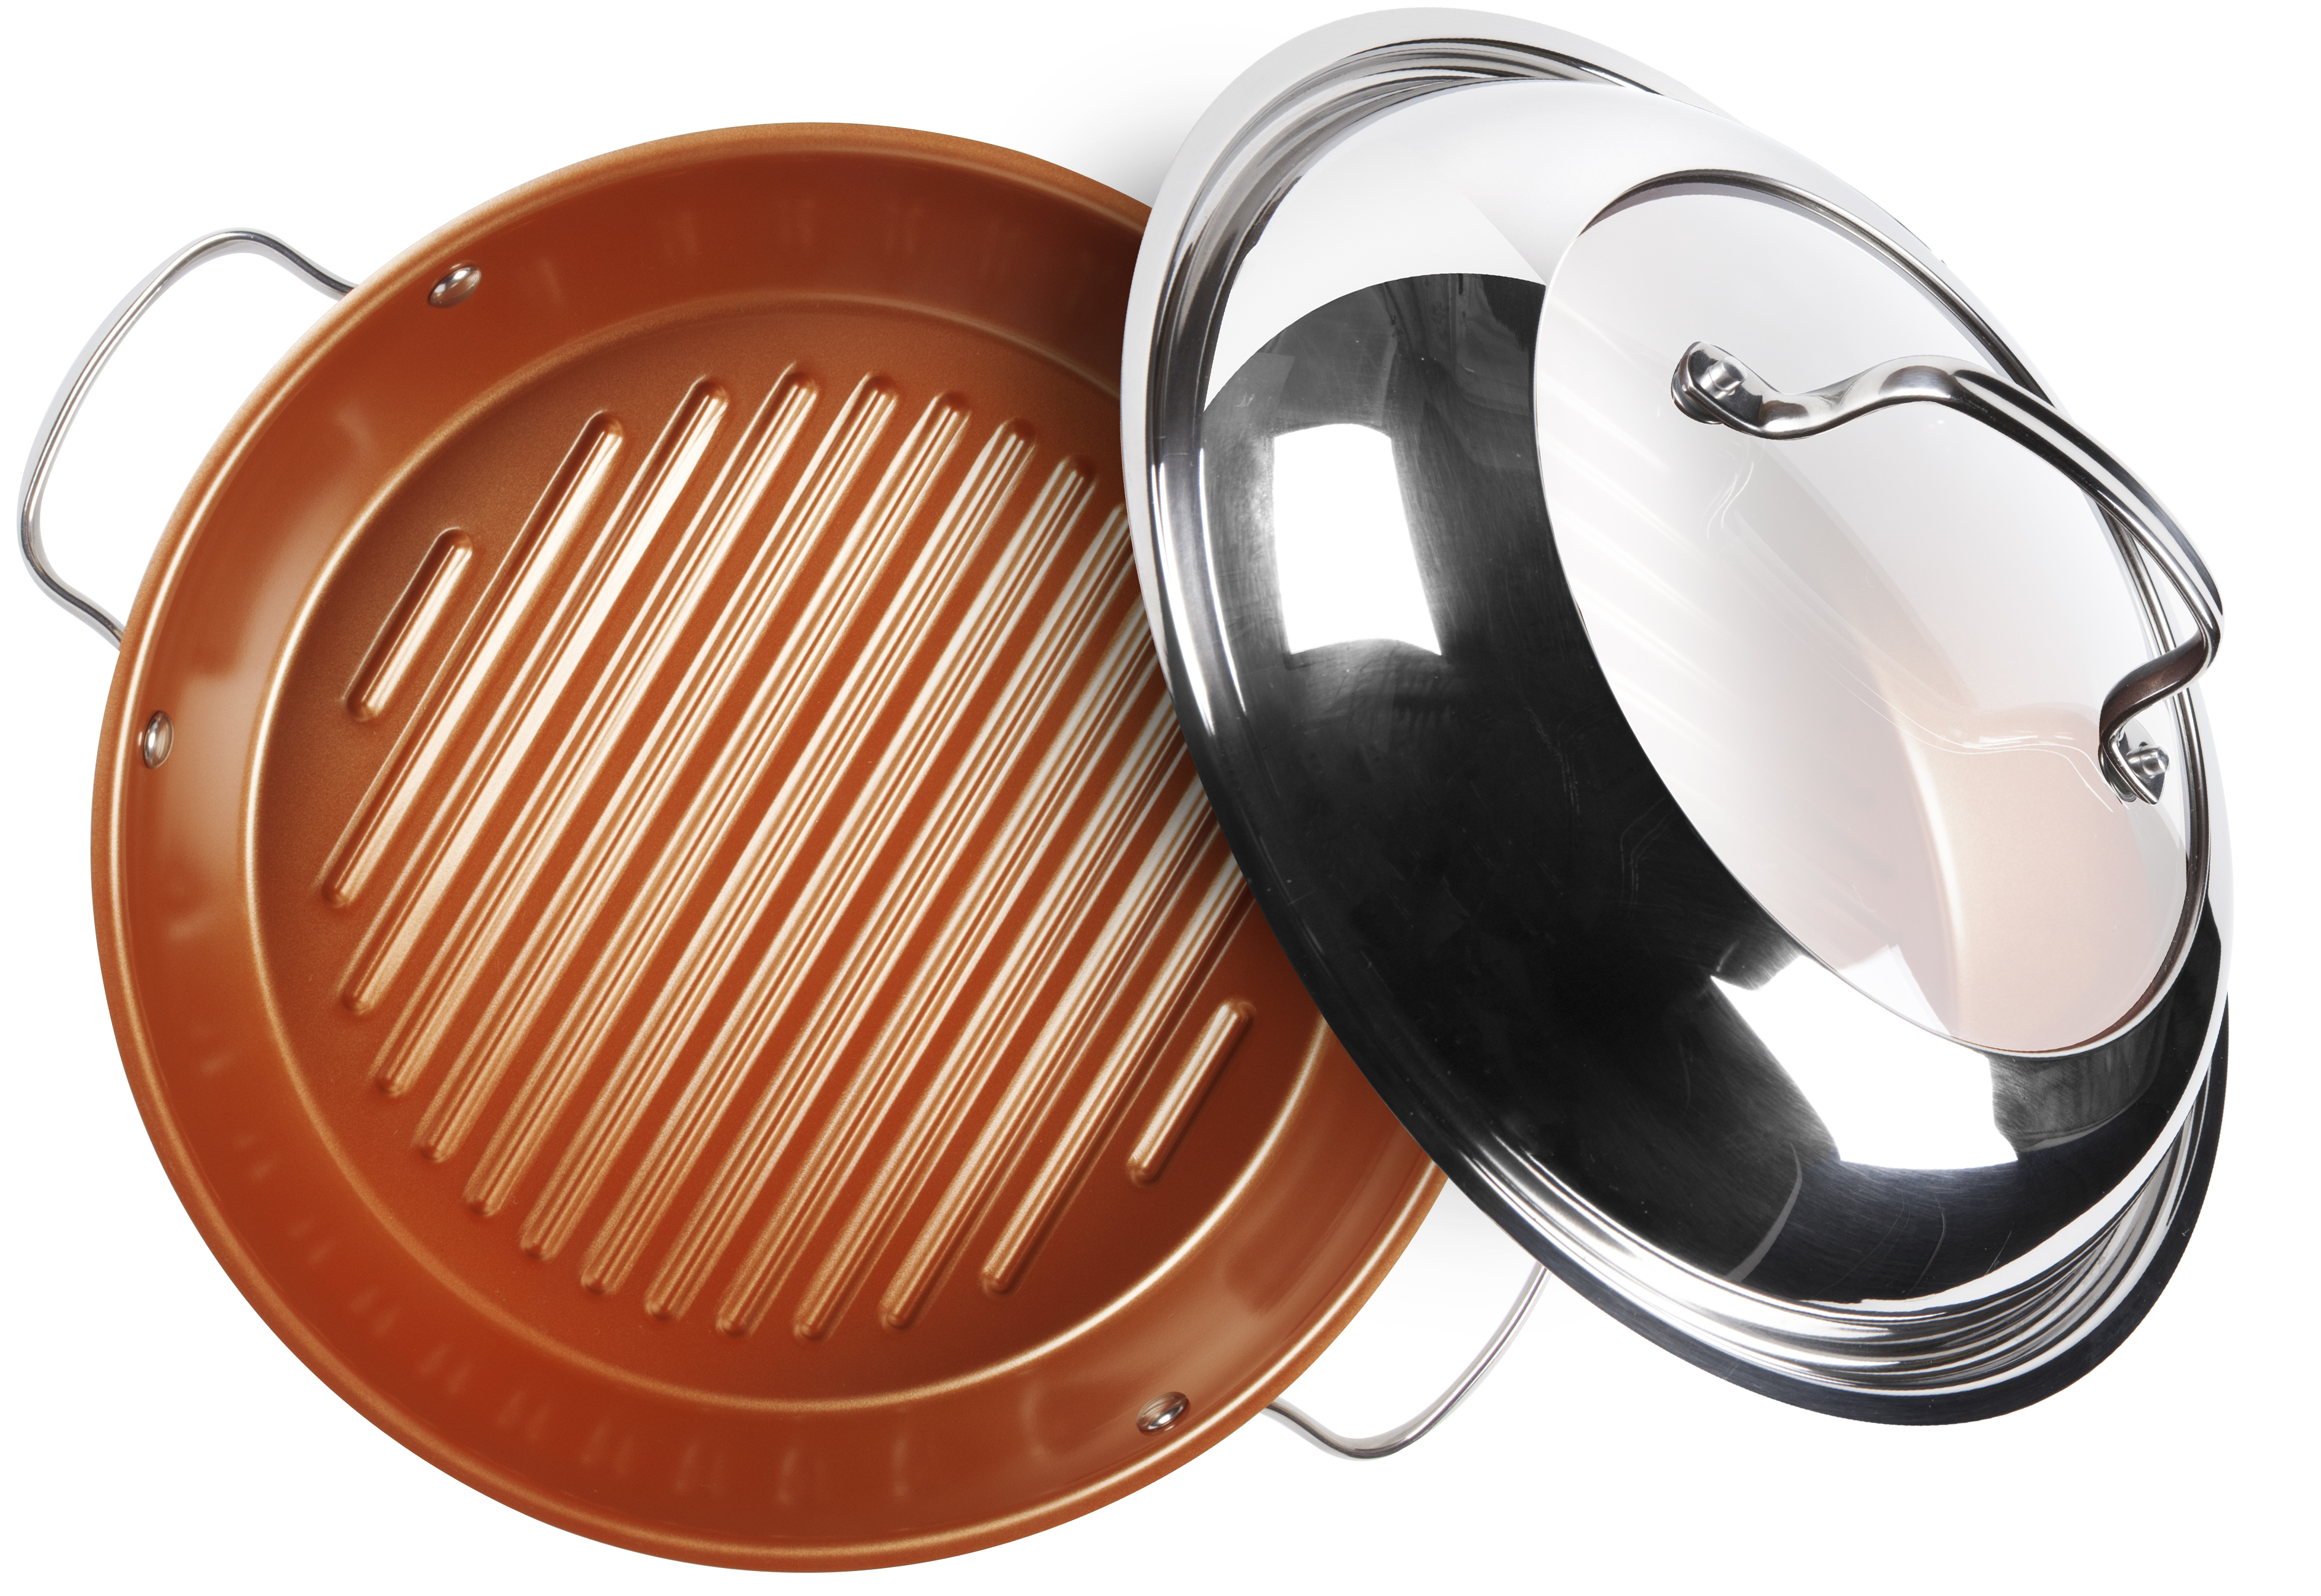 NuWave, LLC Expands Duralon Cookware Collection with Stainless